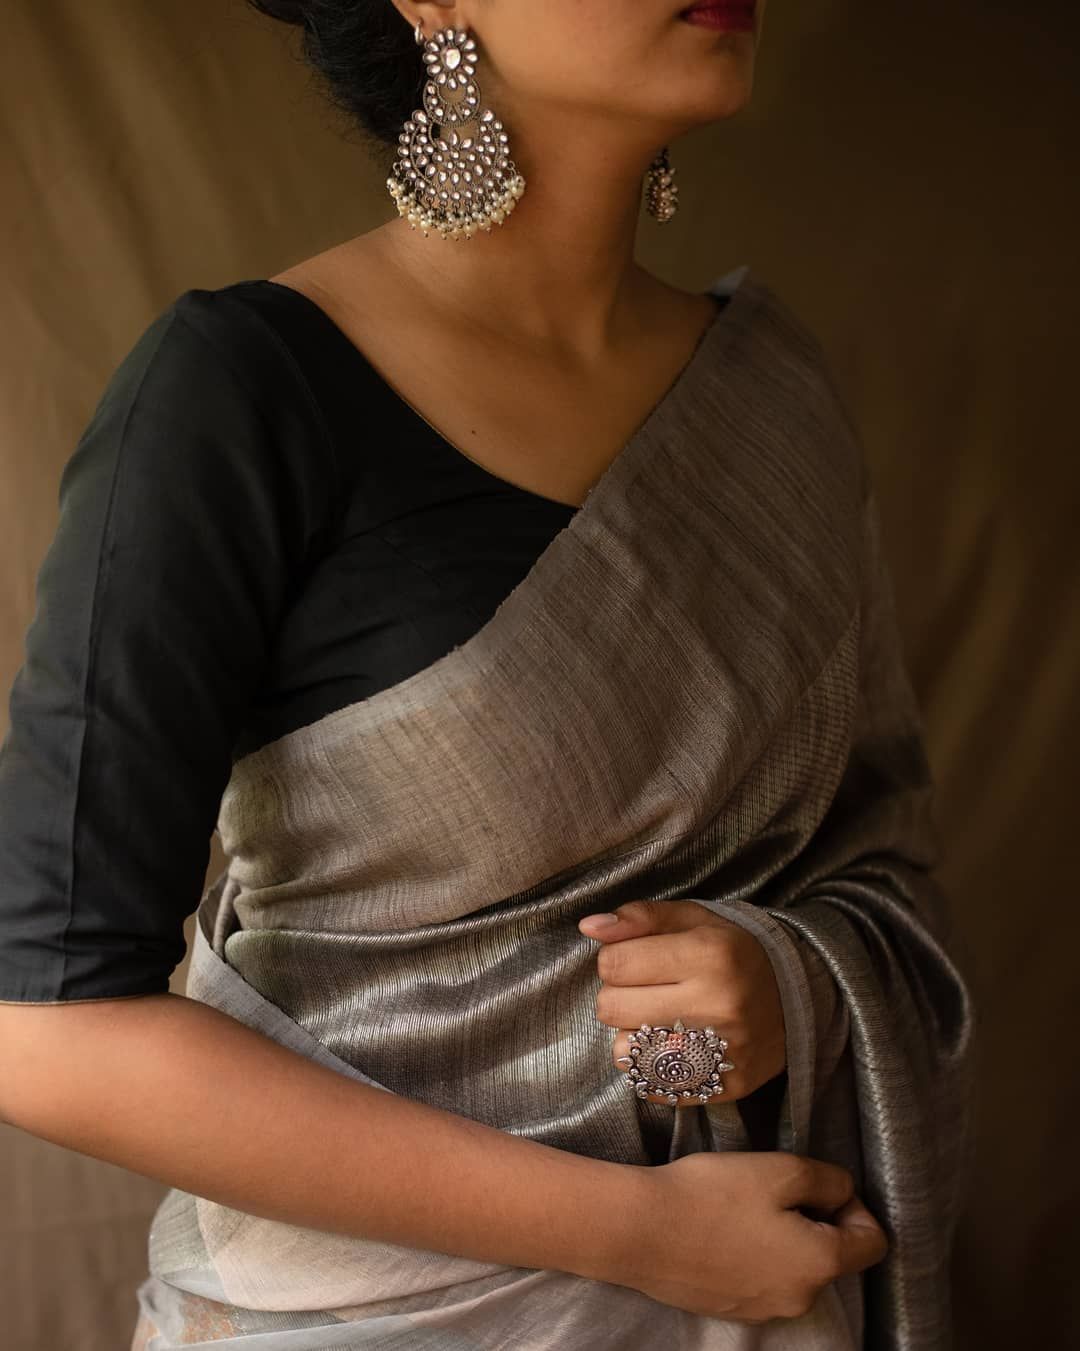 How To Wear The Saree Methods Blouse (95)